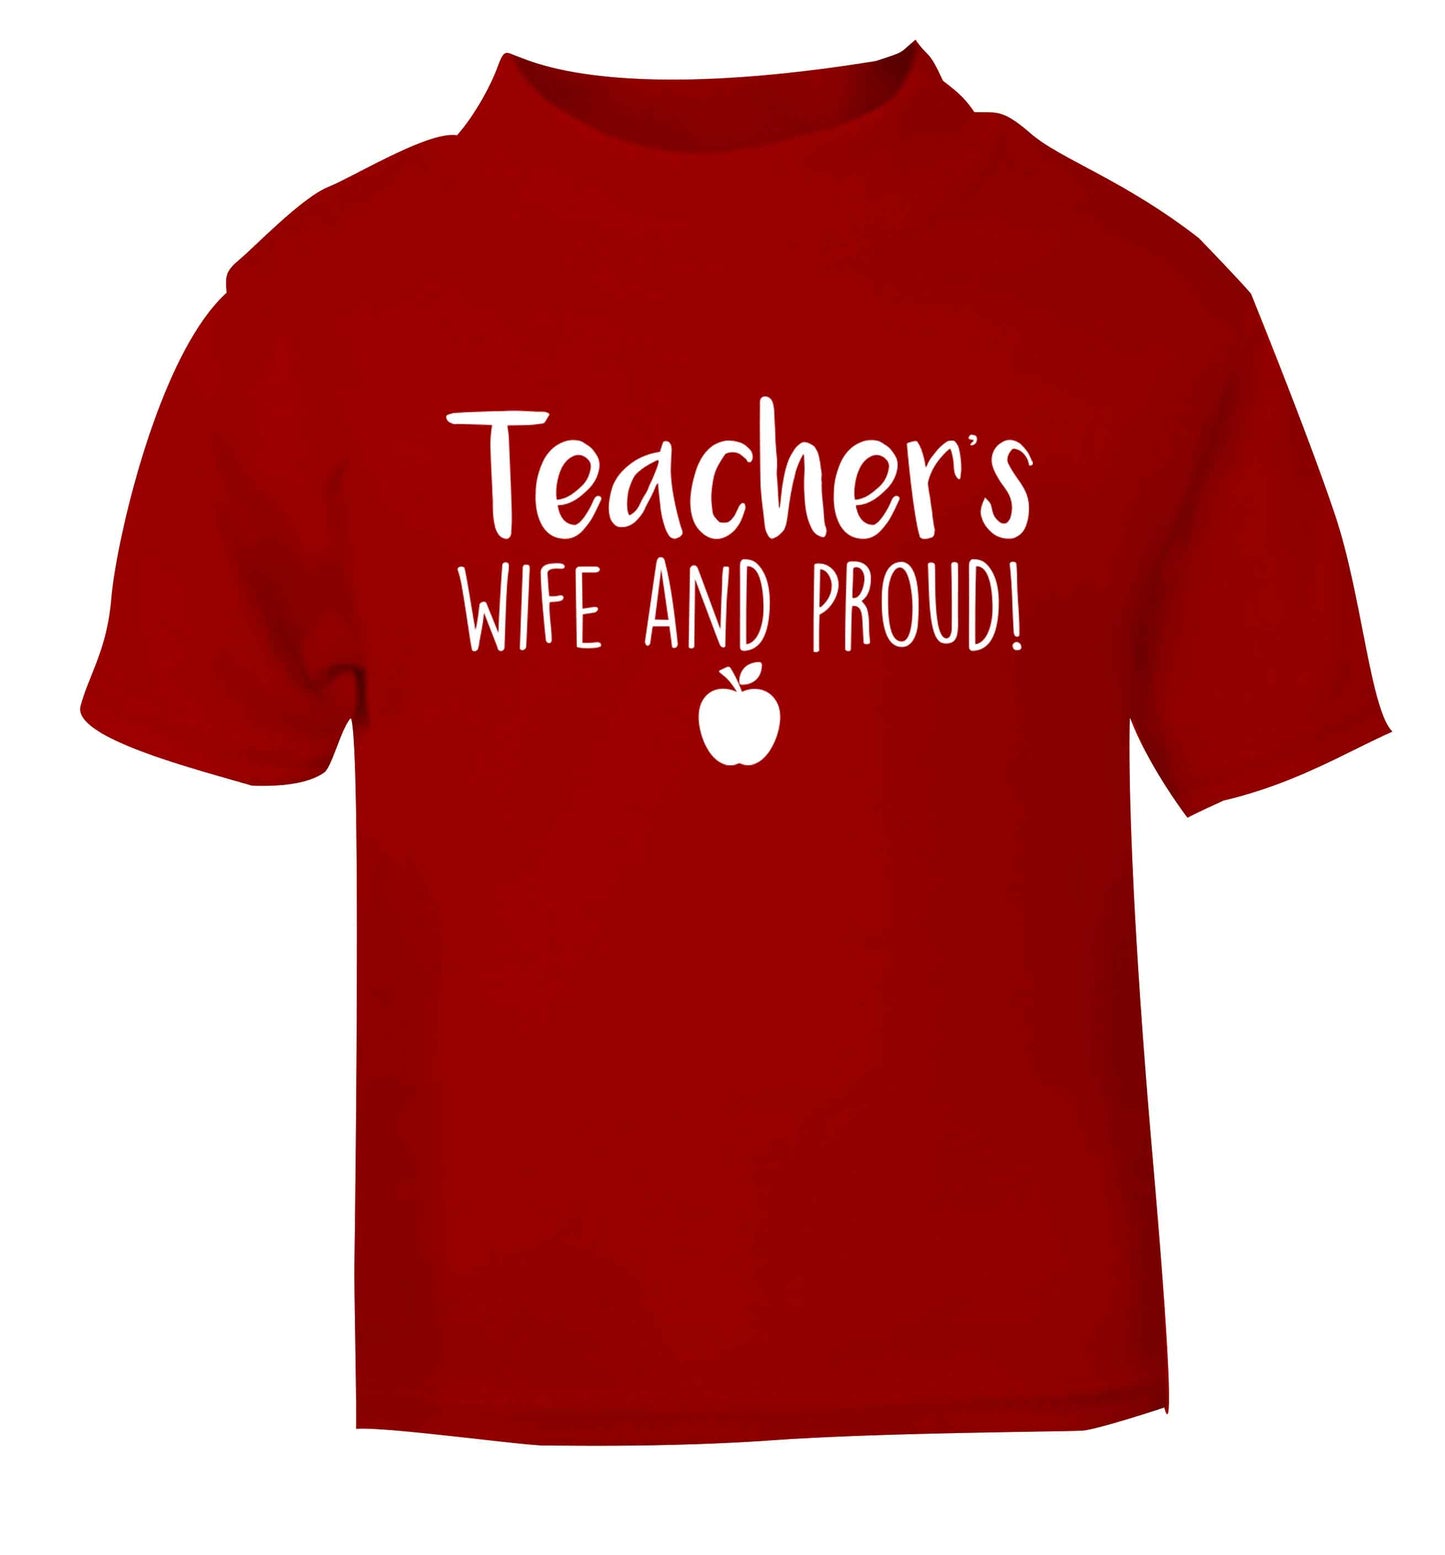 Teachers wife and proud red baby toddler Tshirt 2 Years